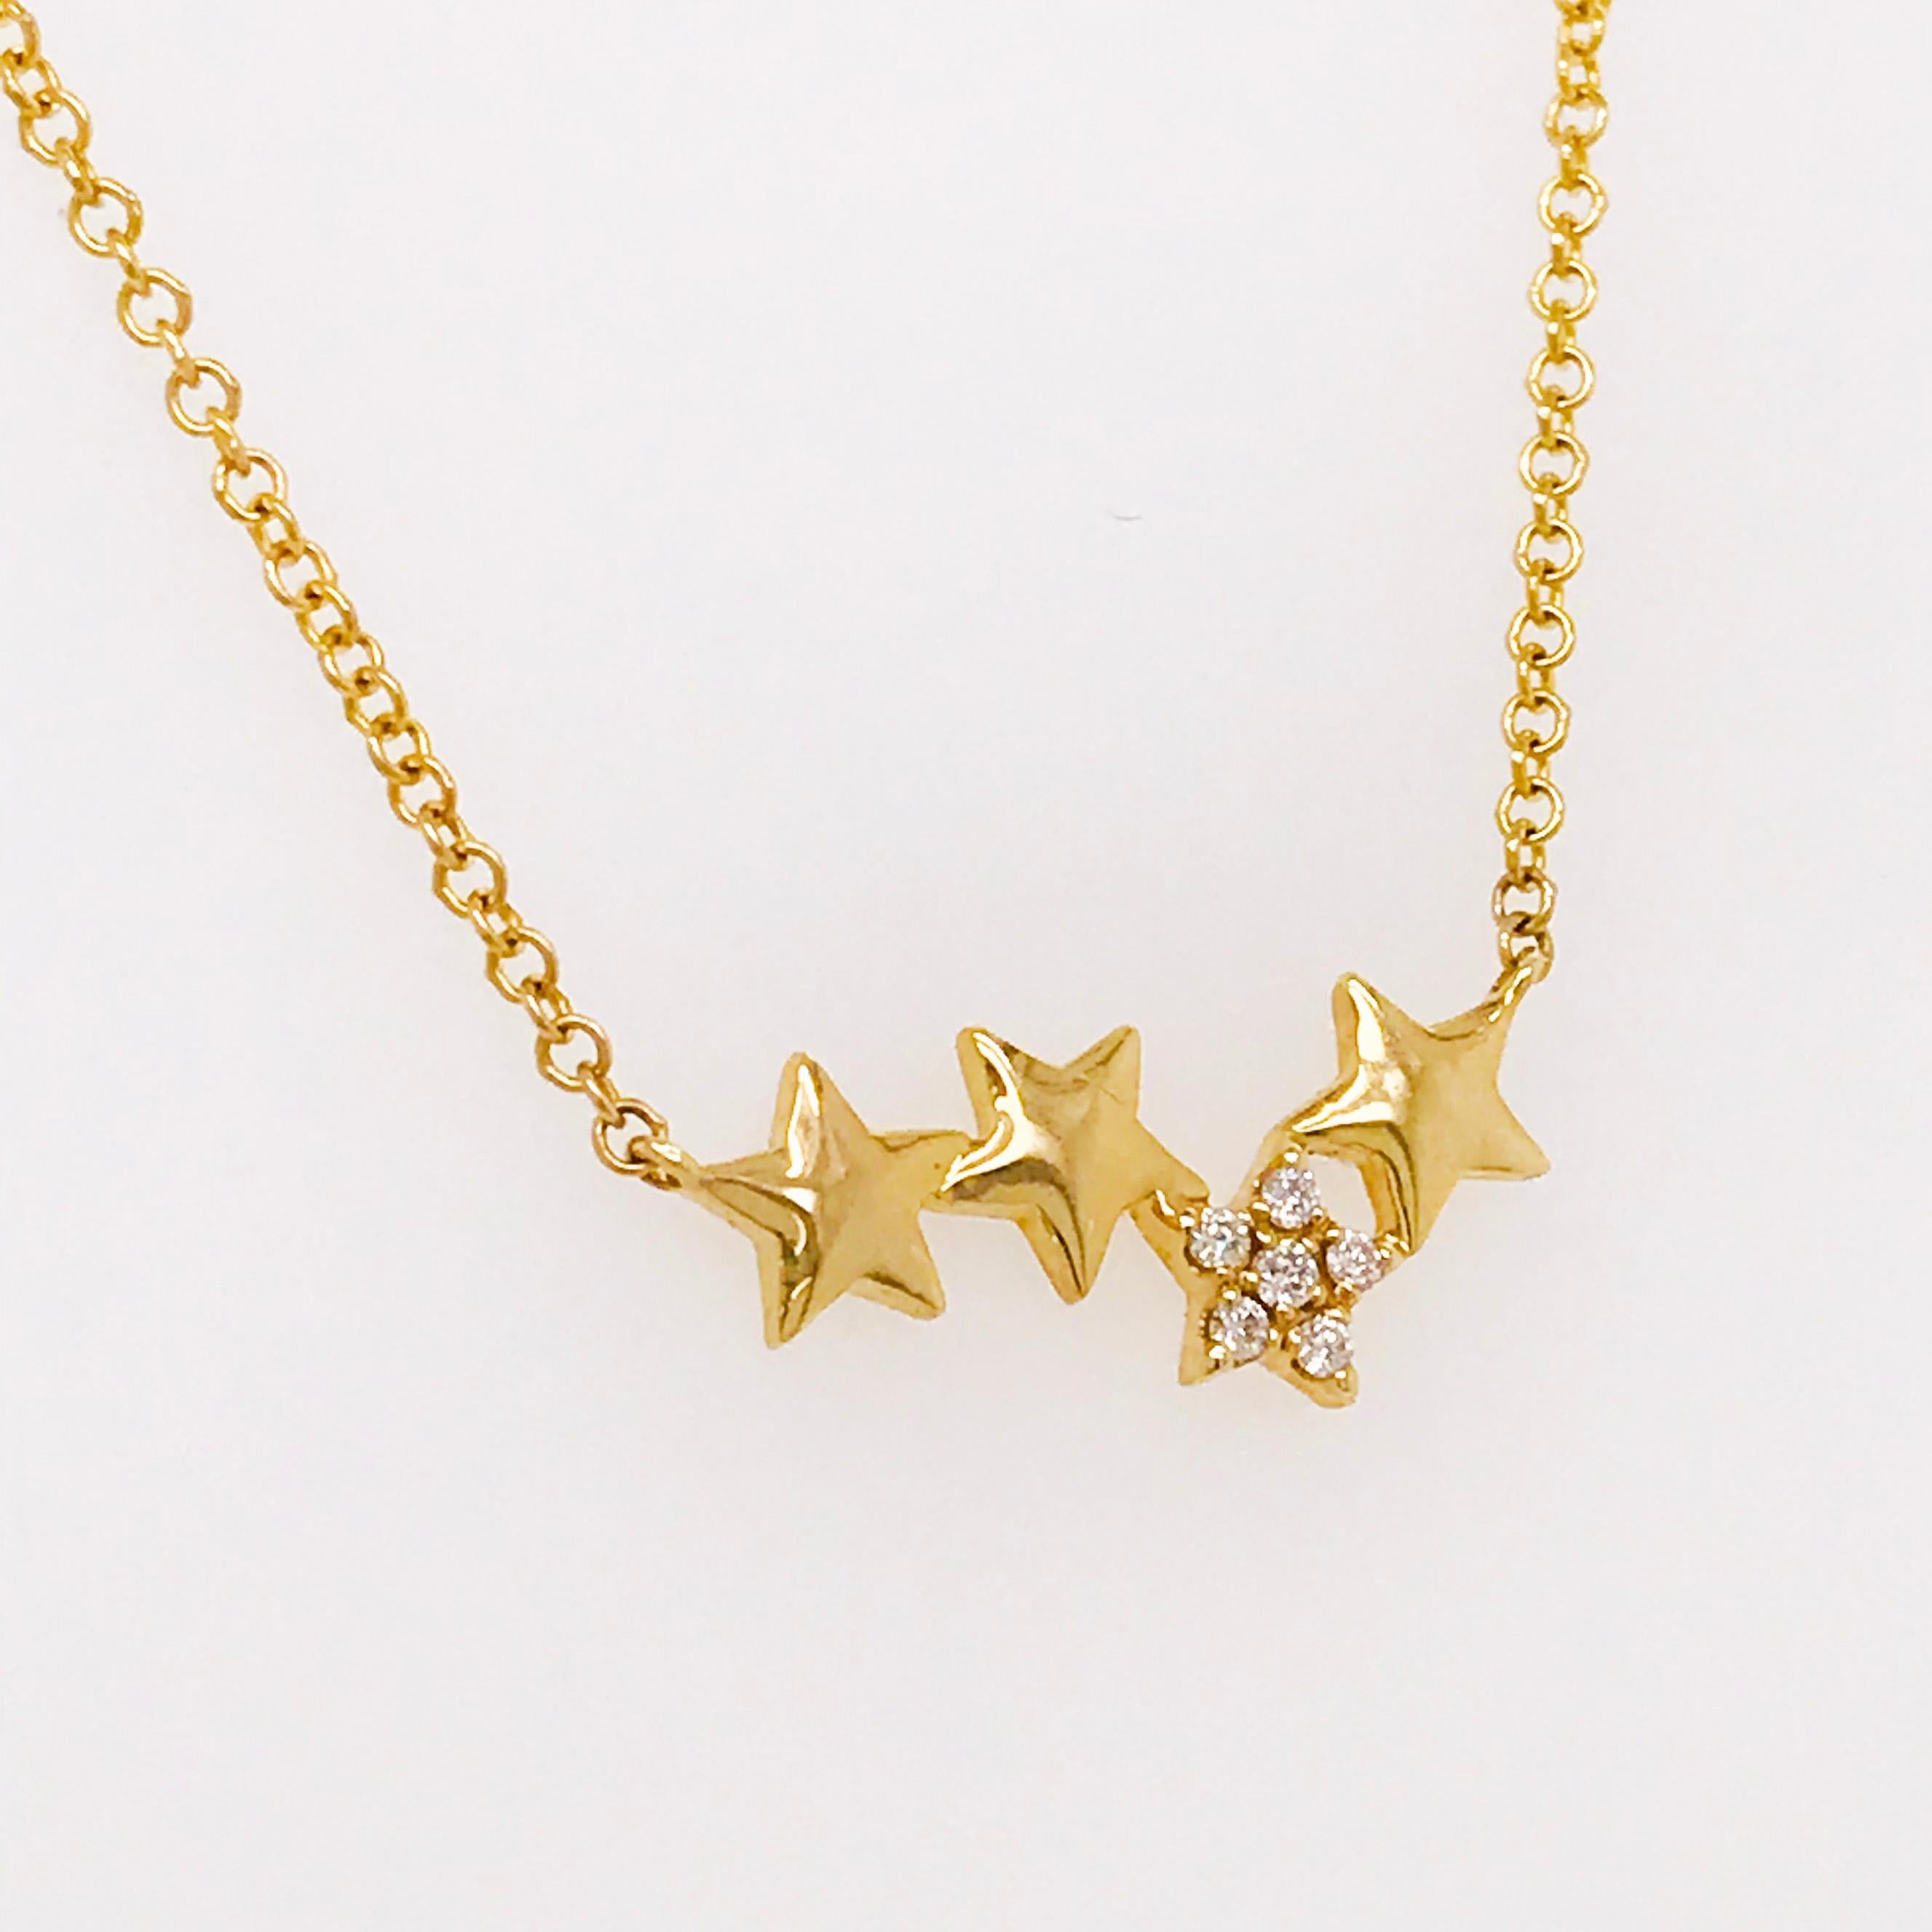 Cute, dainty, sparkly star necklace! This star necklace is adorable and shiny with 6 round brilliant diamonds making one of the four stars shine brightest! This is a 14k yellow gold asymmetrical, astrological diamond pendant. With four stars